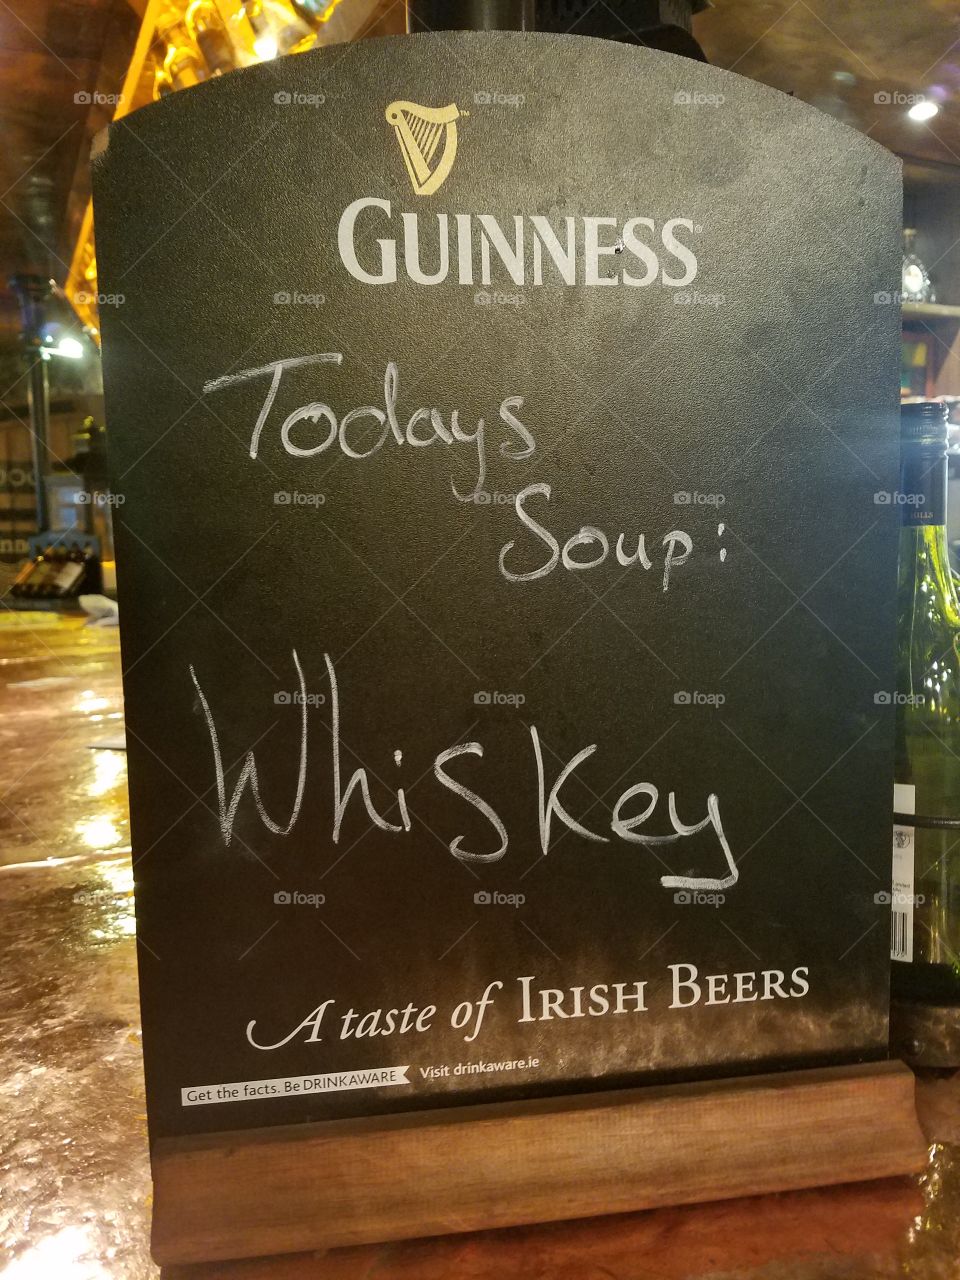 today's soup: whiskey